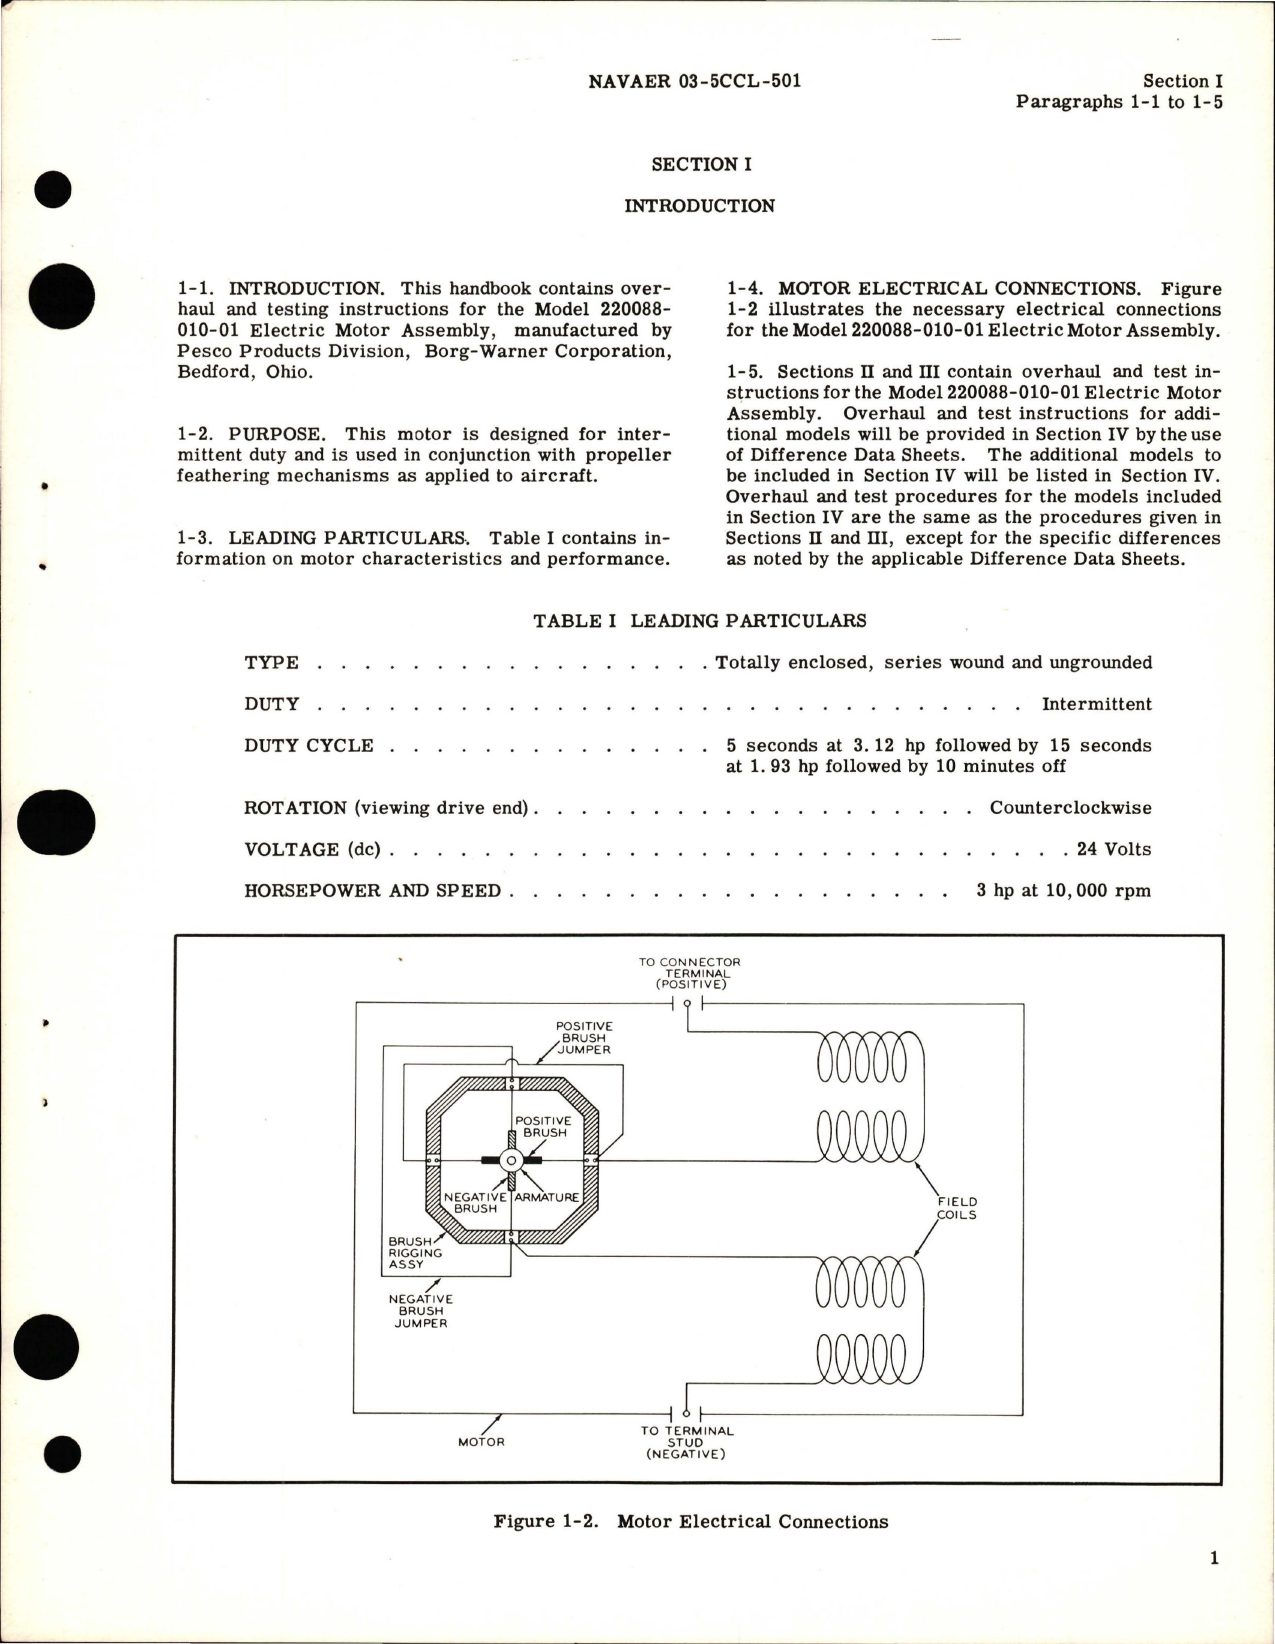 Sample page 5 from AirCorps Library document: Overhaul Instructions for Electric Motor Assembly - Model 220088-010-01